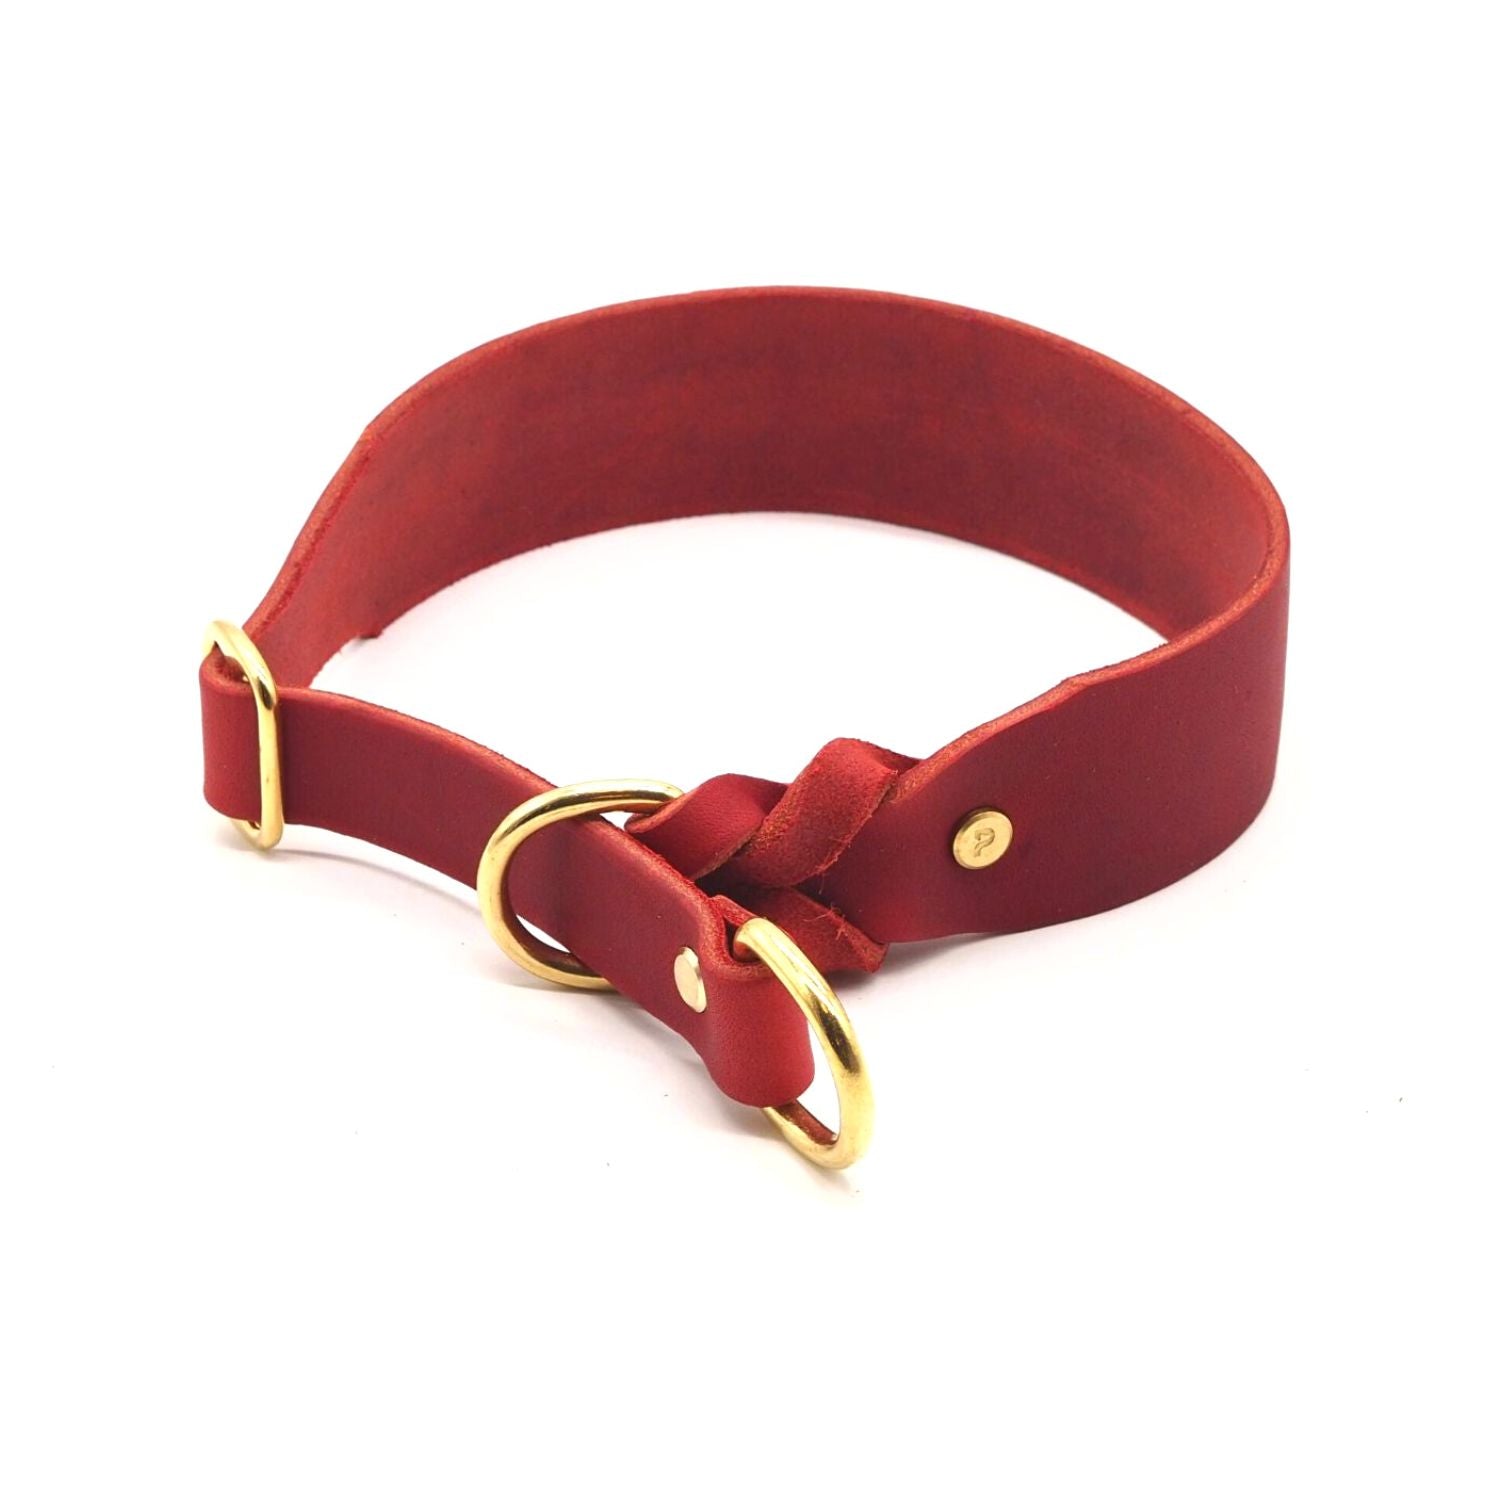 Pull stop collar made of greased leather 'Chili'